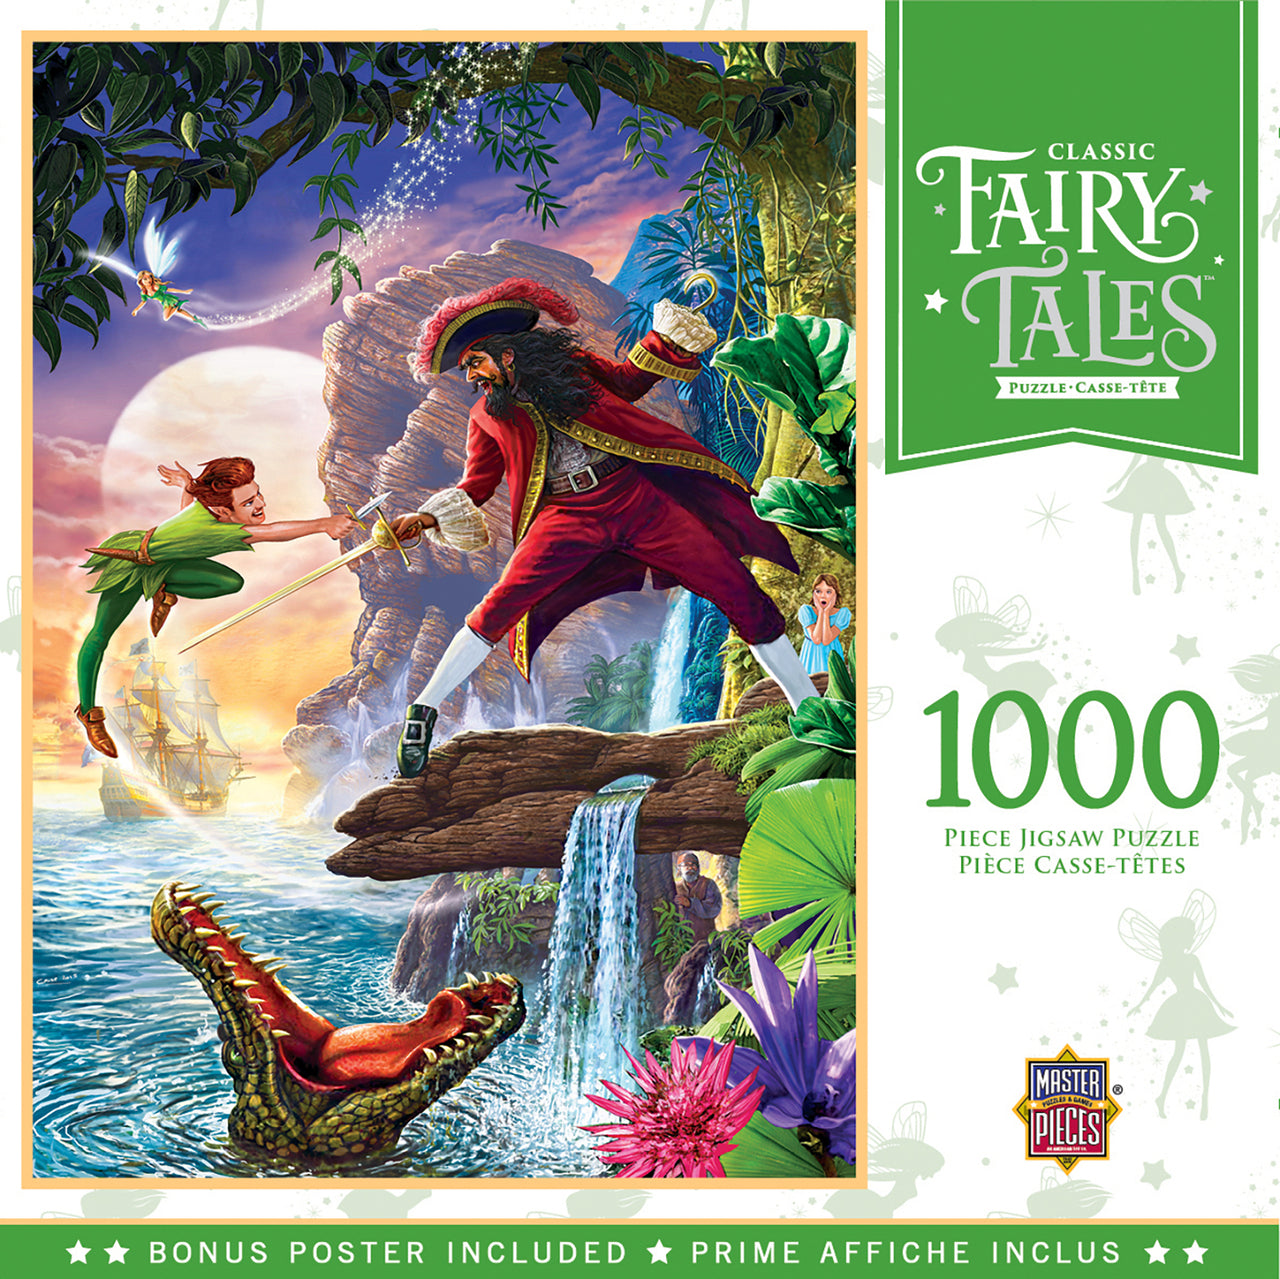 Classic Fairytales - Peter Pan 1000 Piece Jigsaw Puzzle by Masterpieces